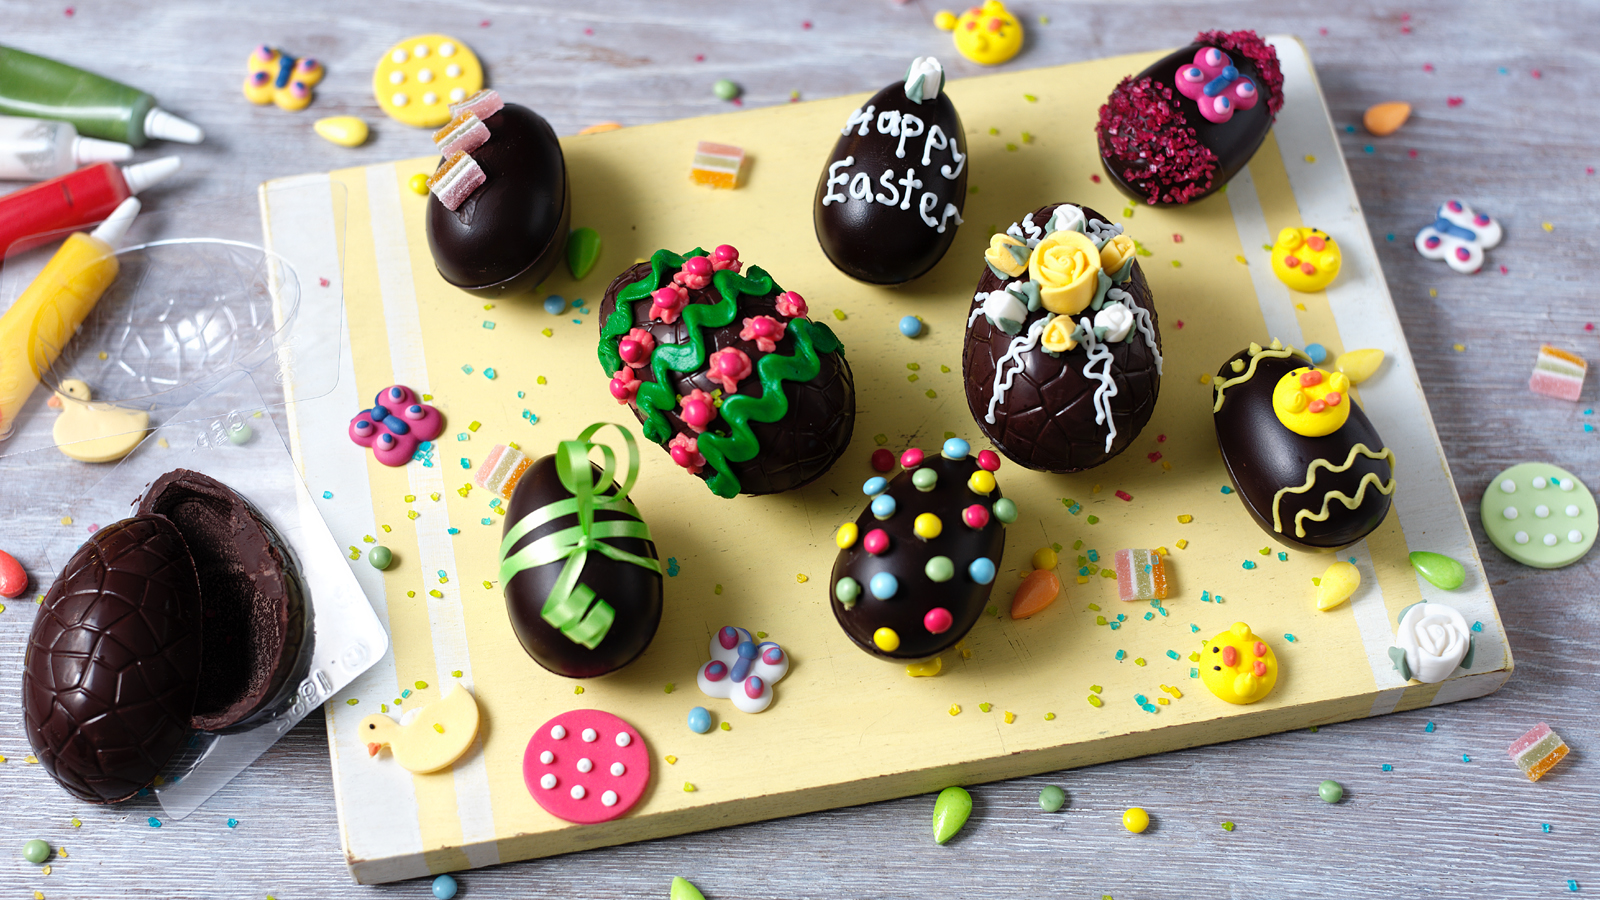 Reduce your Easter waste: Make your own chocolate eggs